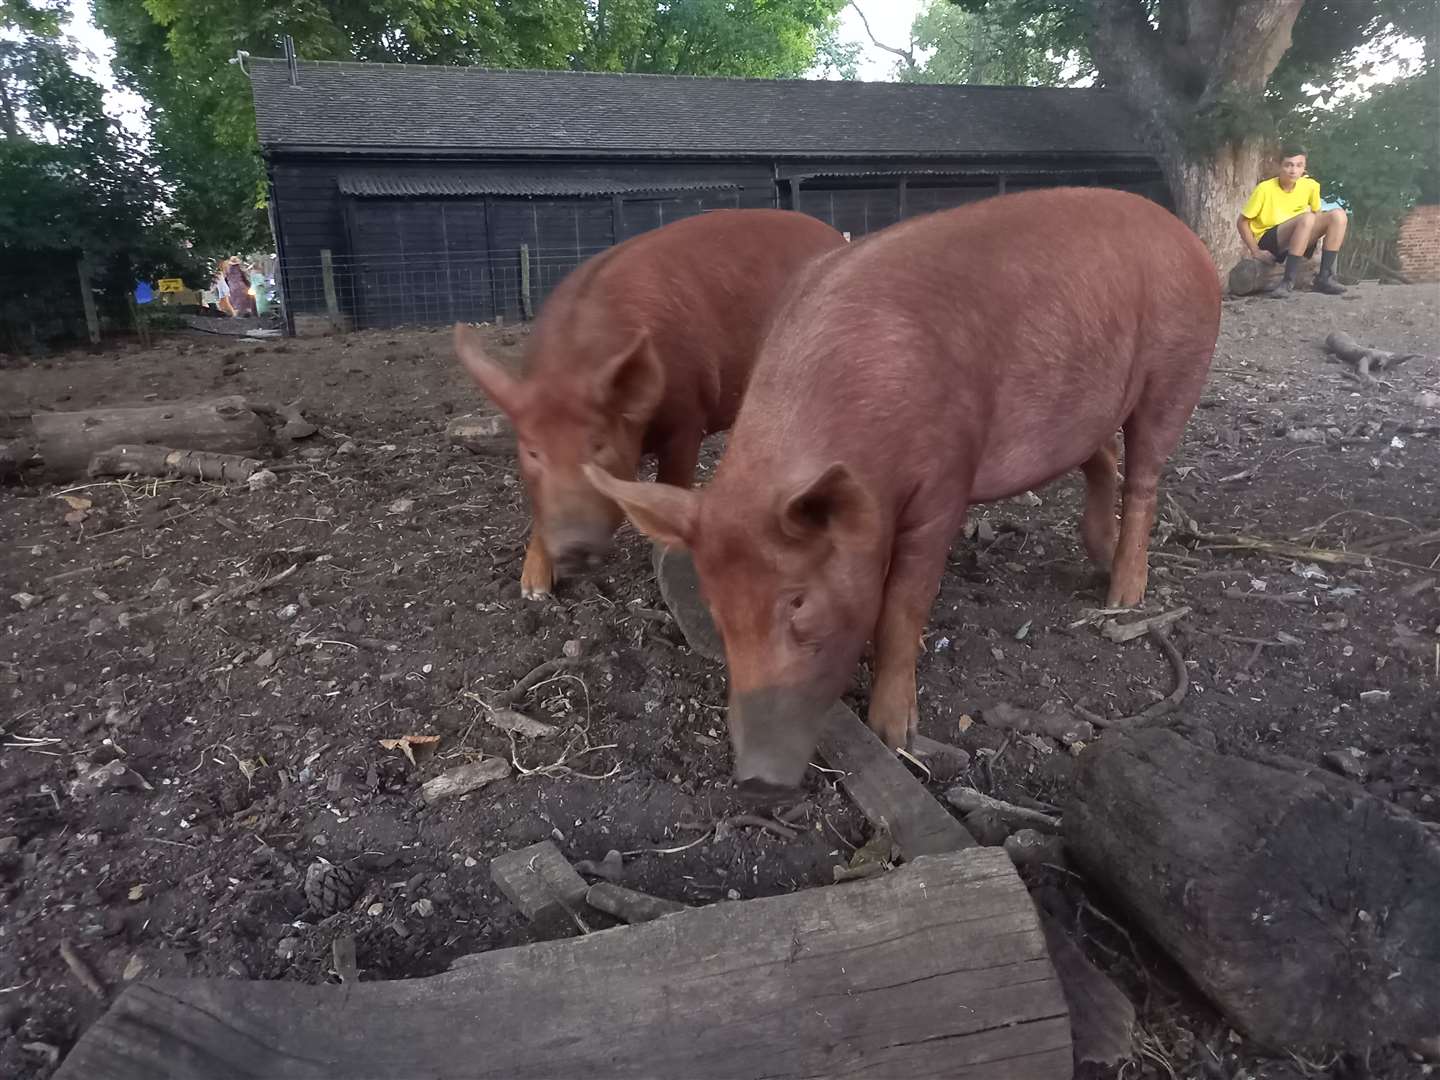 Pigs weren't fazed by the music next door at the festival's second stage